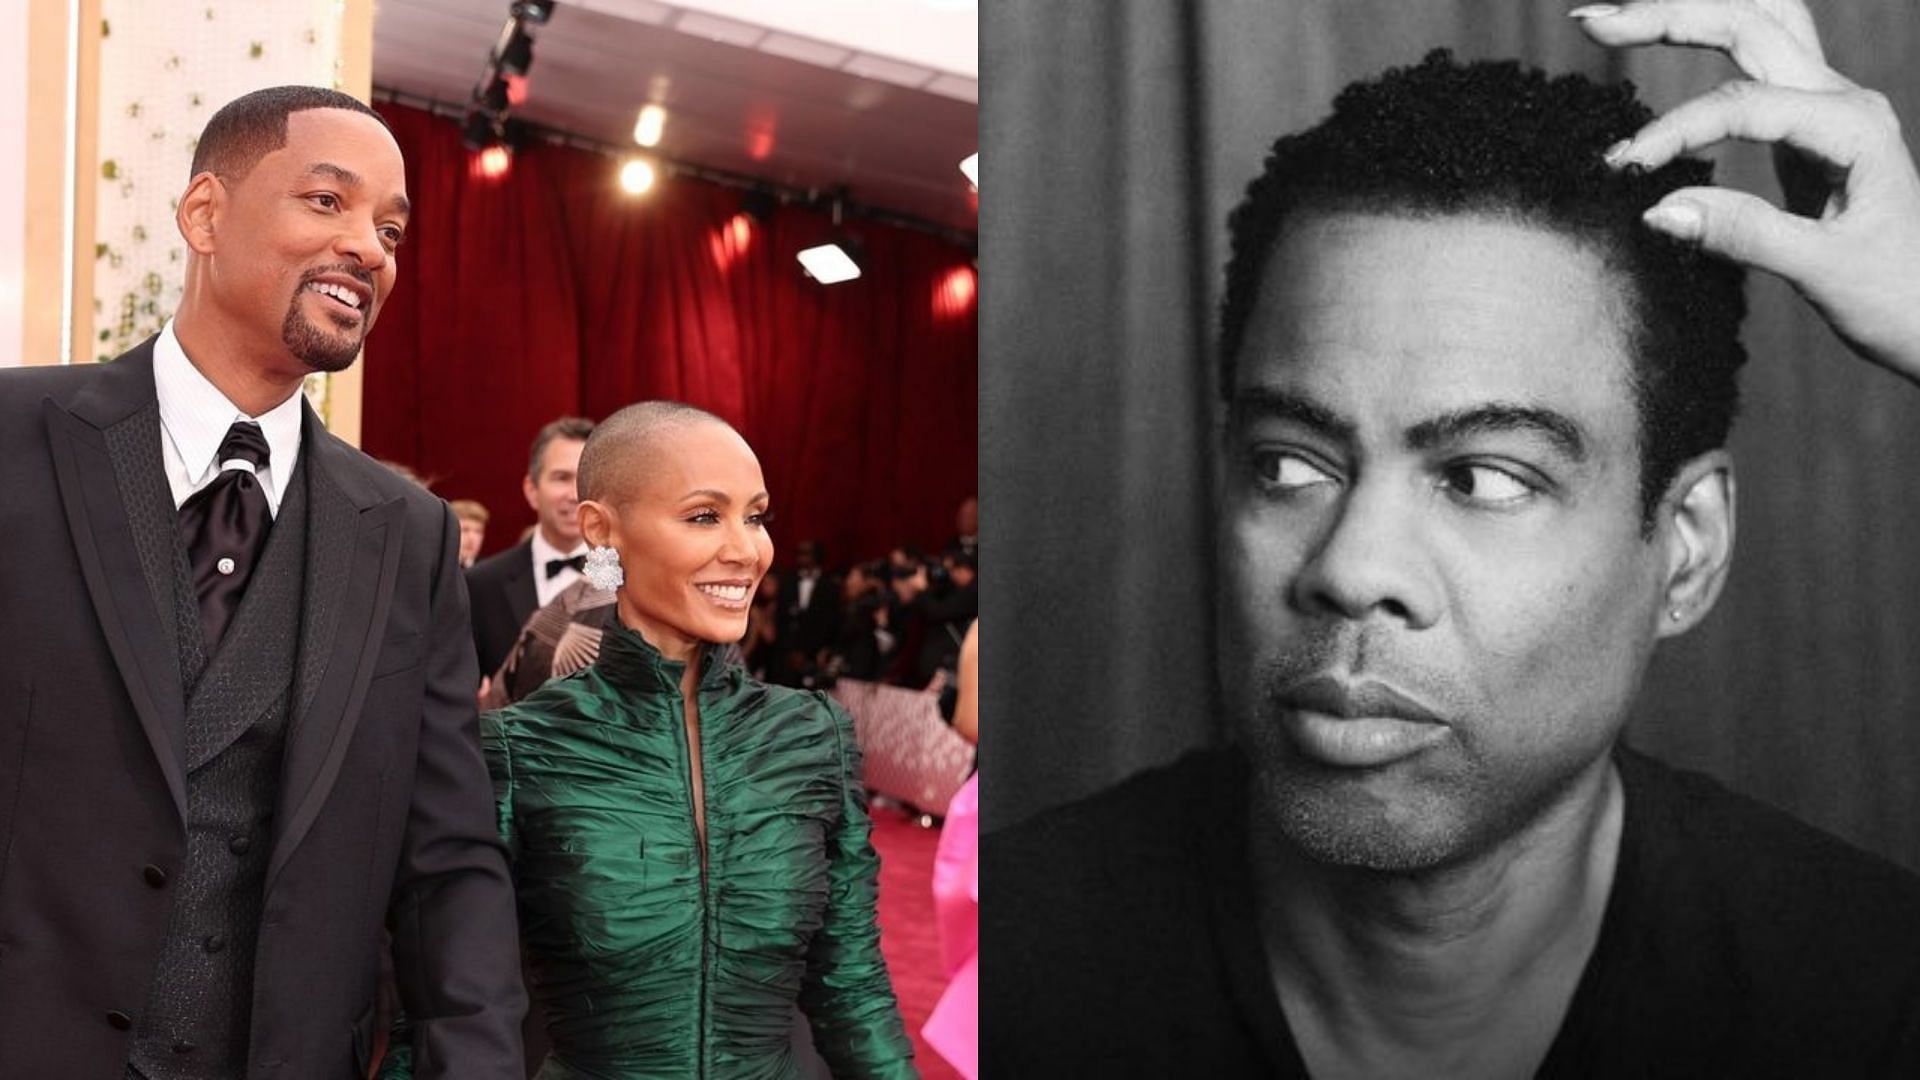 Will Smith smacked Chris Rock for making fun of his wife Jada Pinkett Smith at Oscars 2022 (Image via theacademy/Instagram, @chrisrock/Twitter)